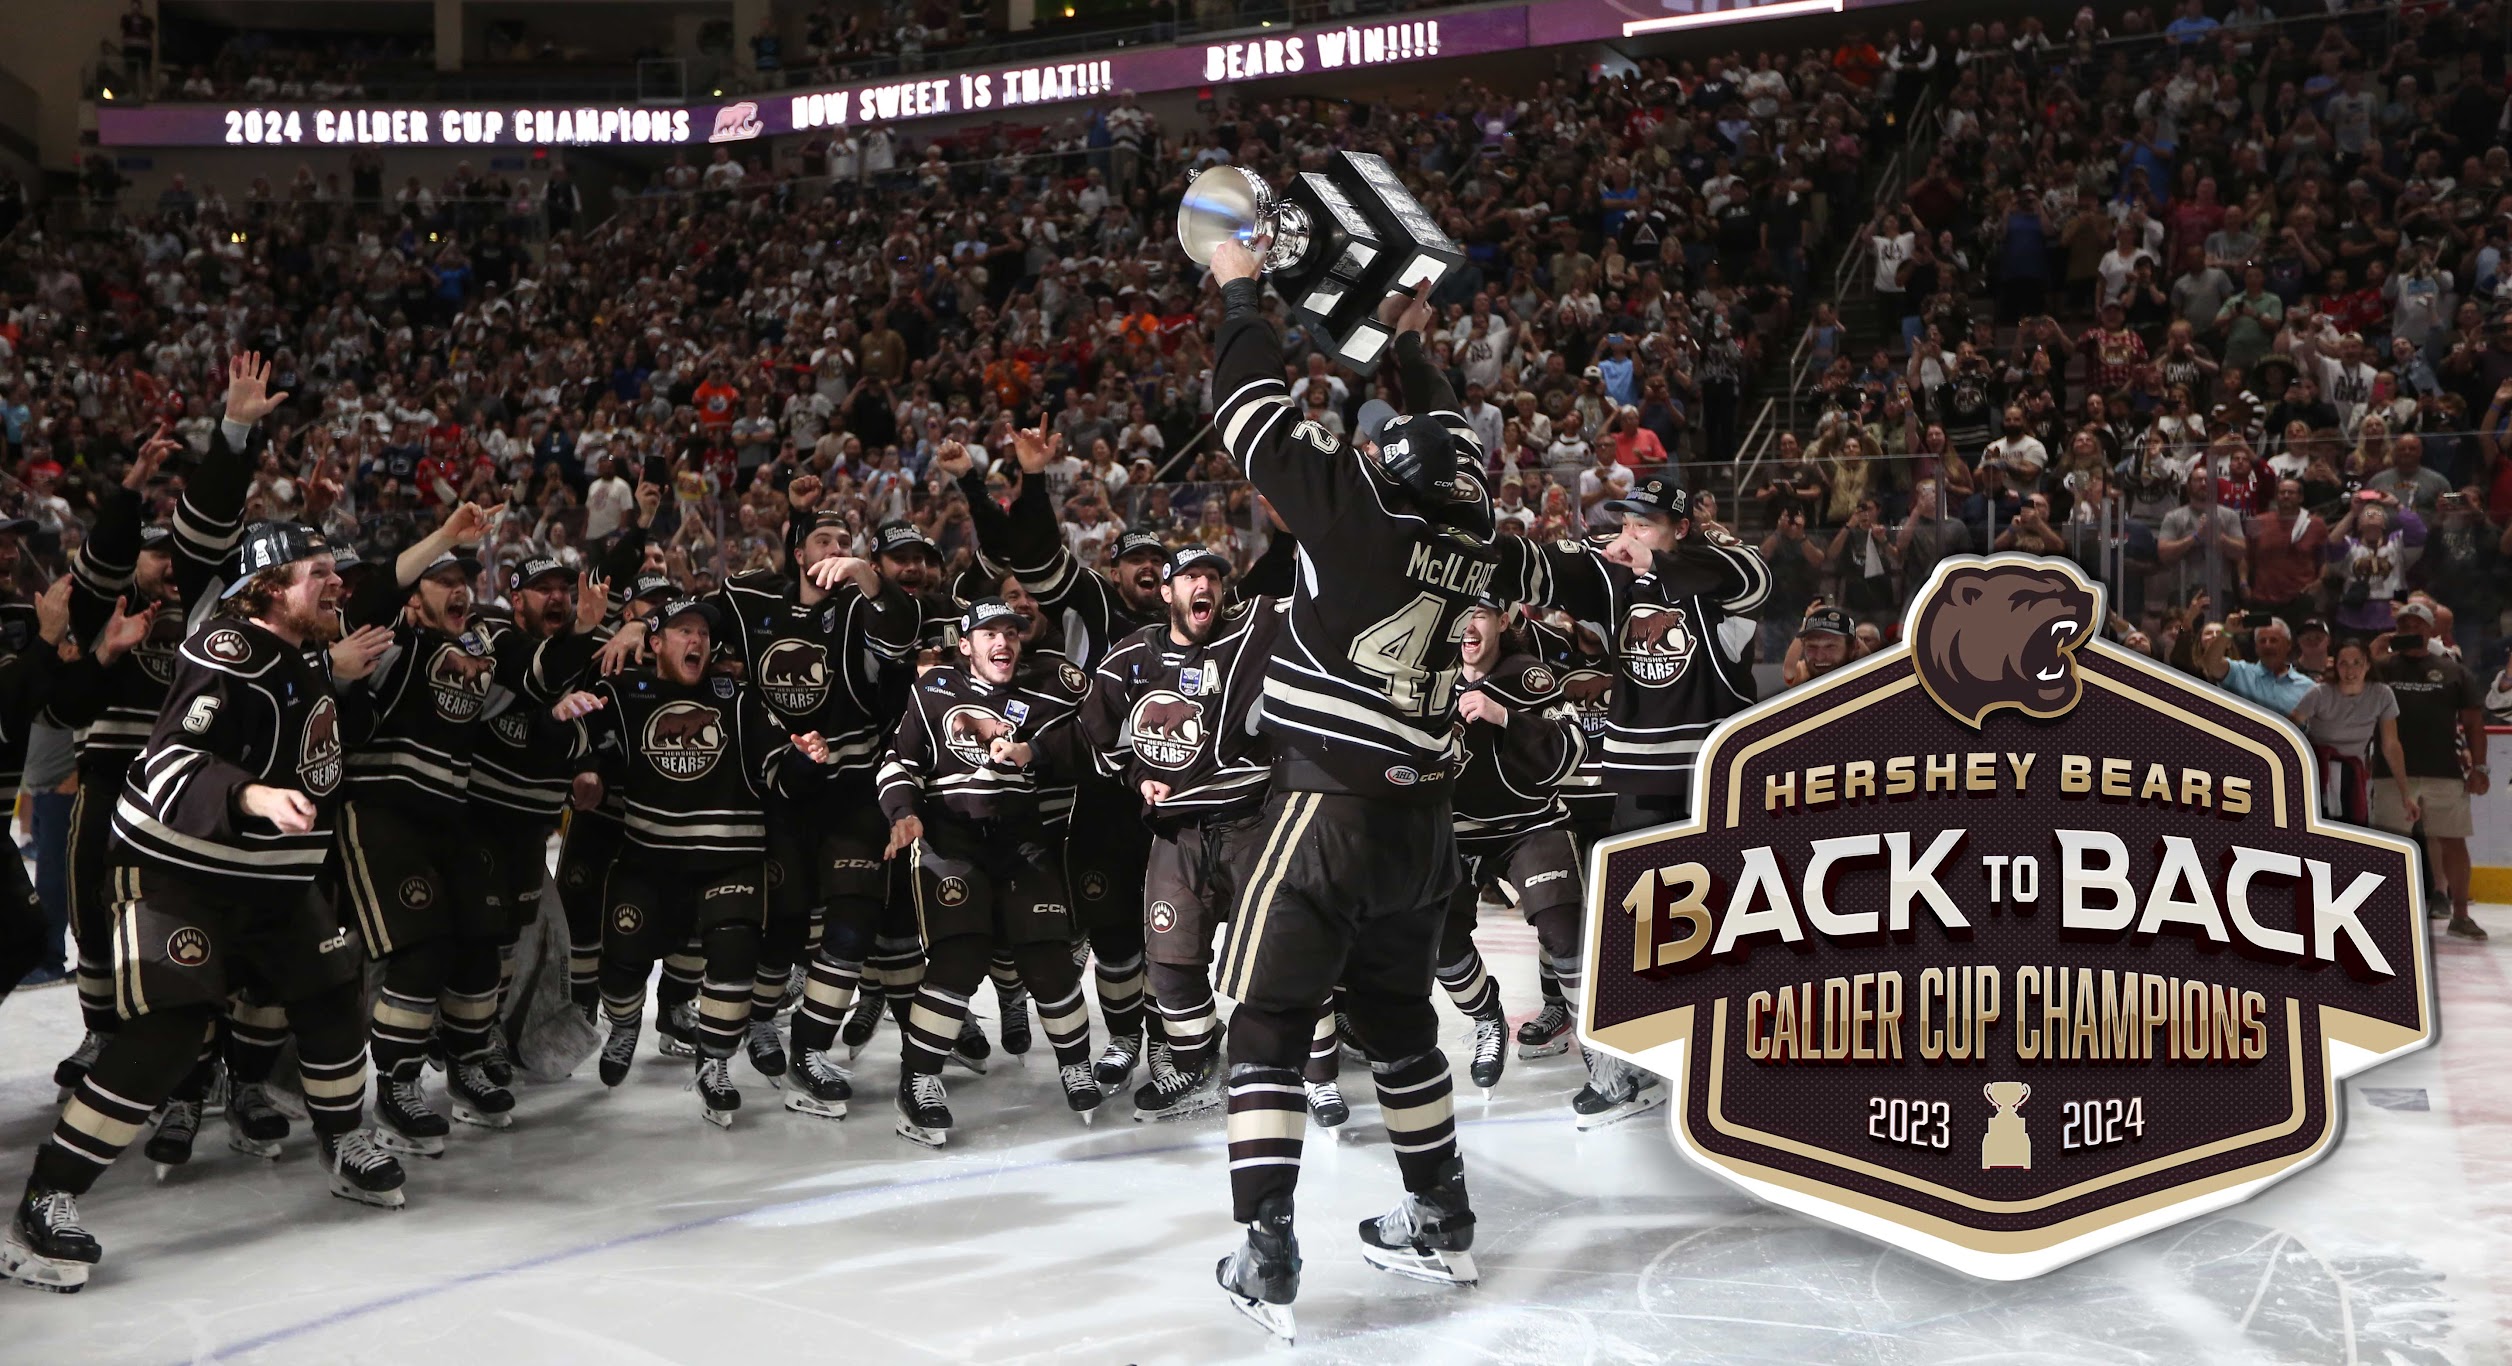 Back to Back Calder Cup Champions